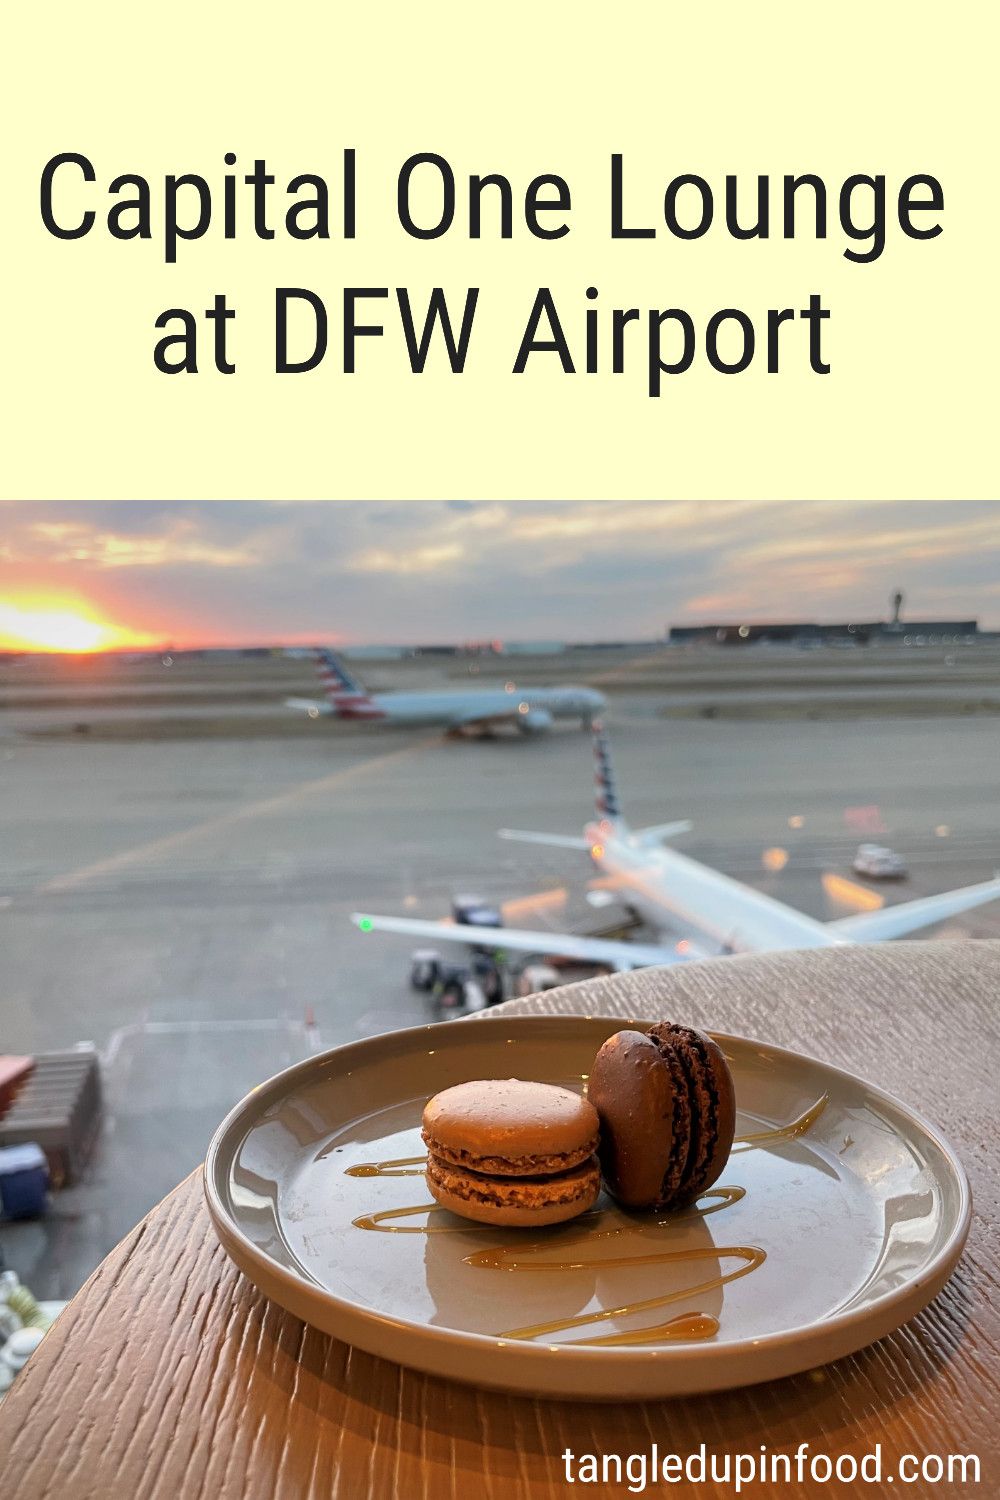 Plate of macarons with airport runway in the background and text reading "Capital One Lounge at DFW Airport"